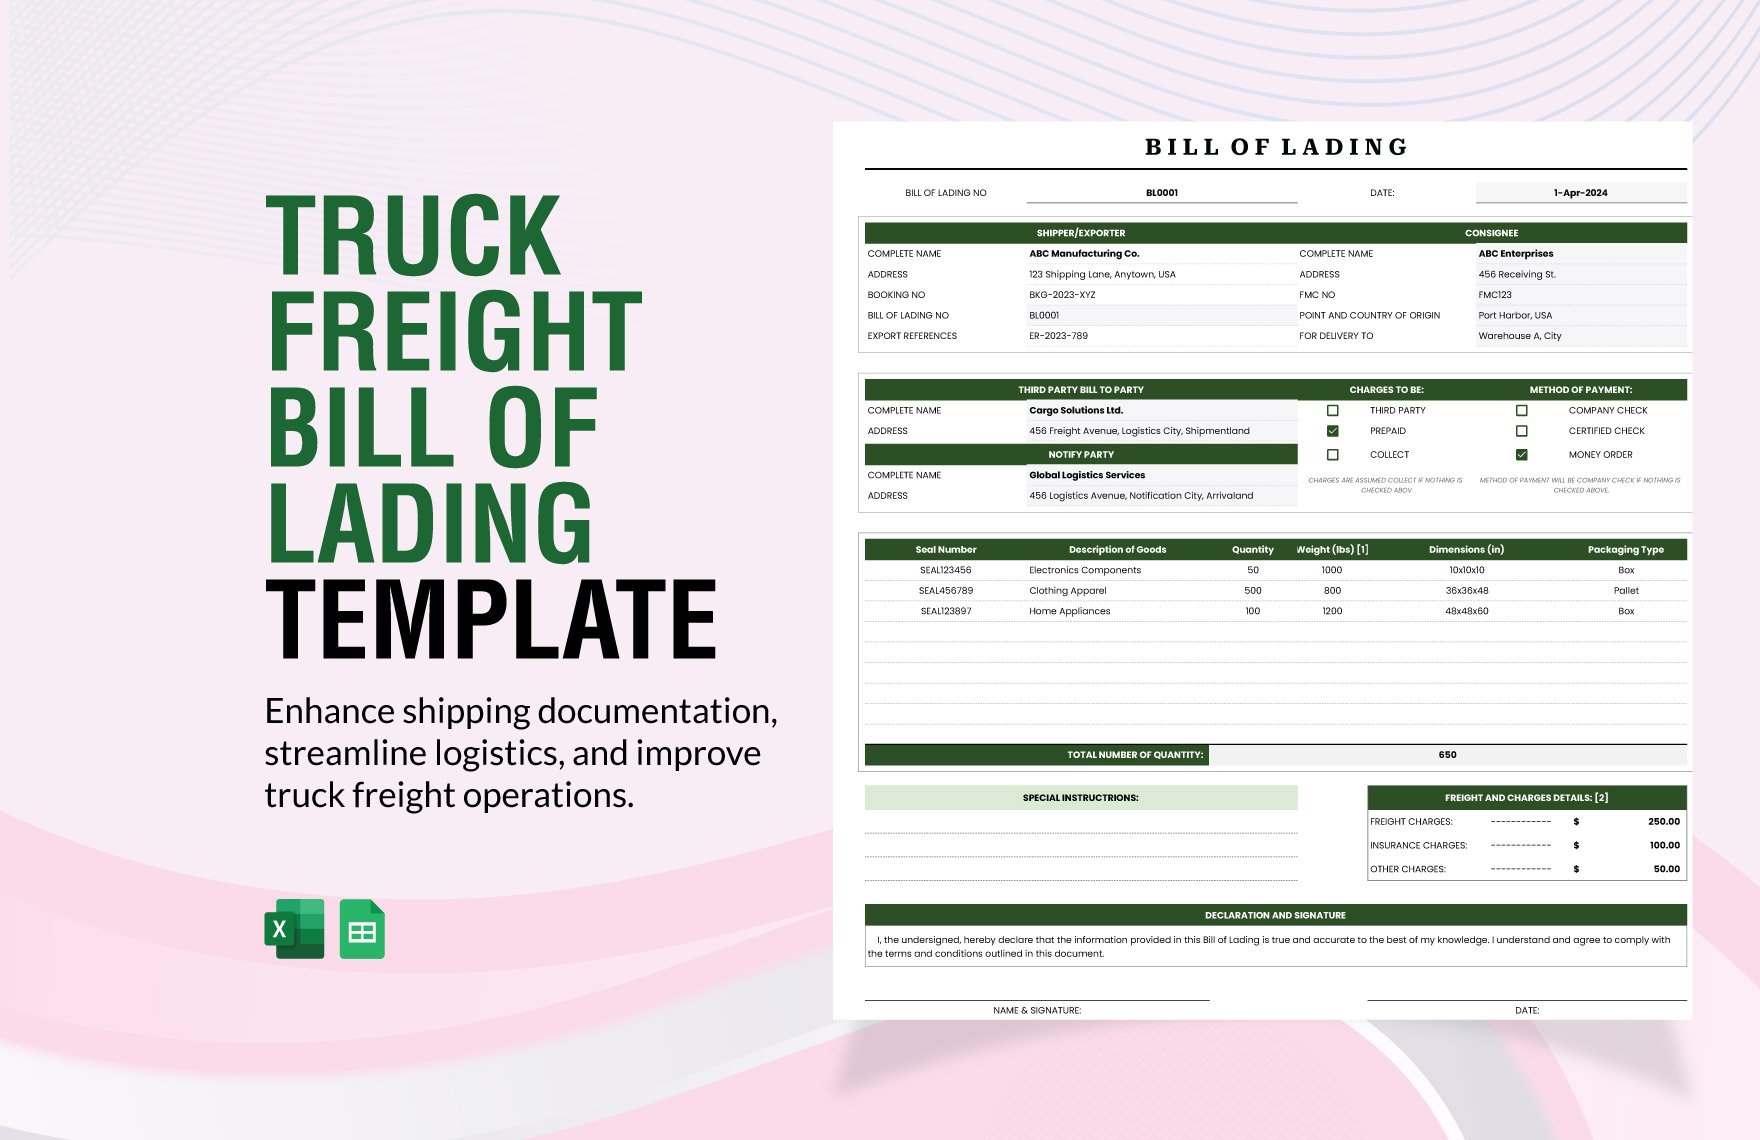 Truck Freight Bill of Lading Template in Excel, Google Sheets